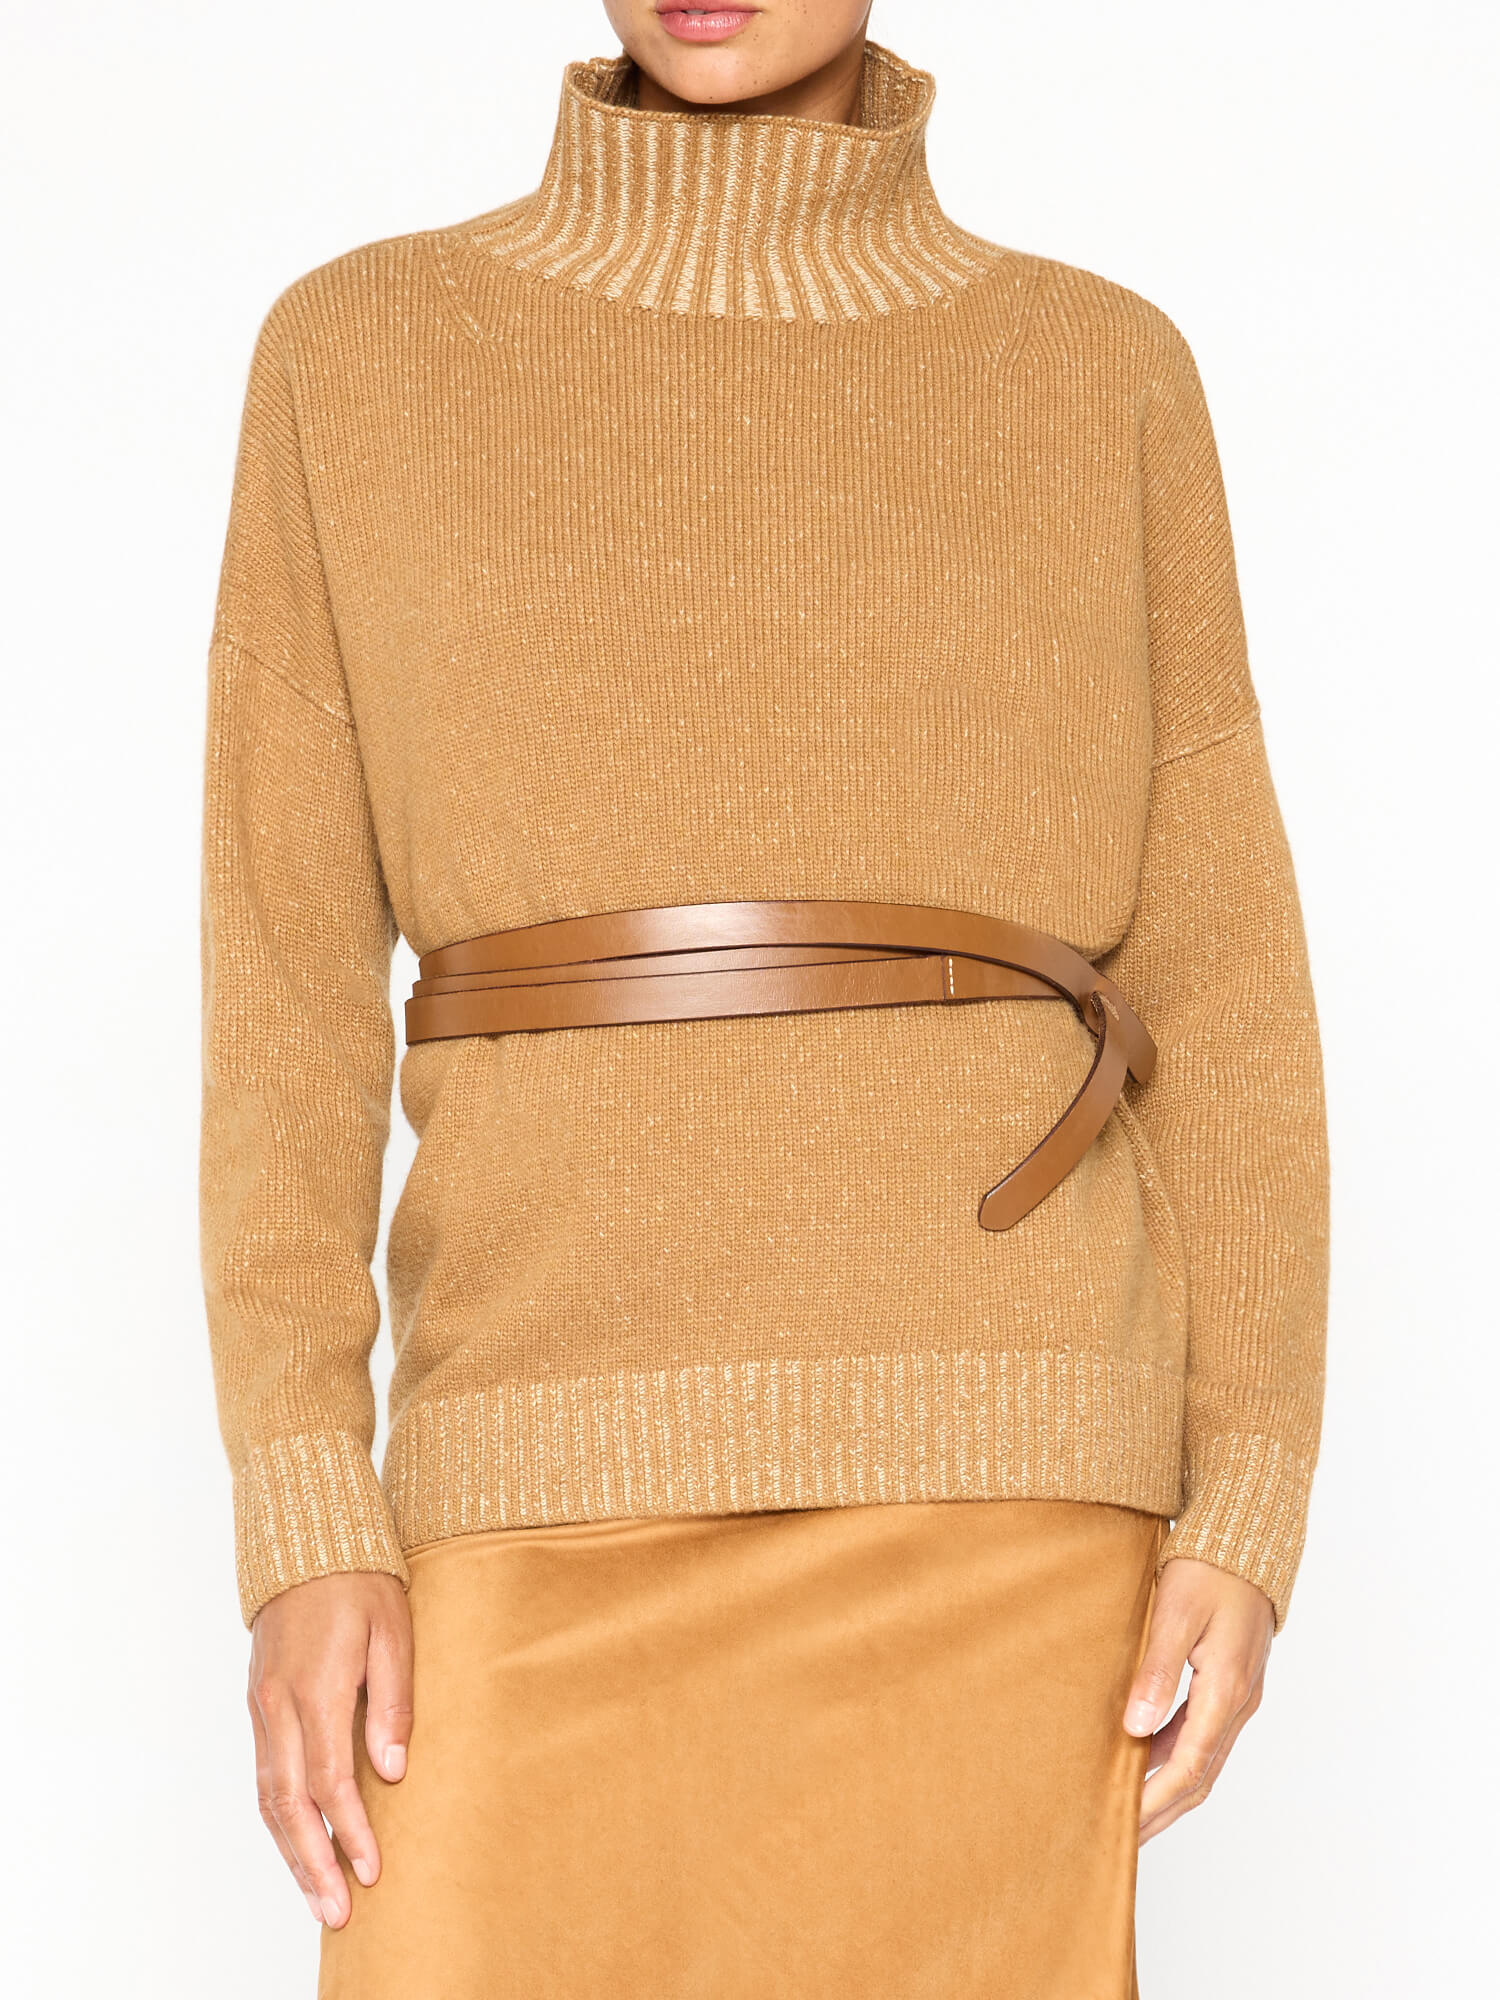 Ana tan turtleneck sweater front view 3